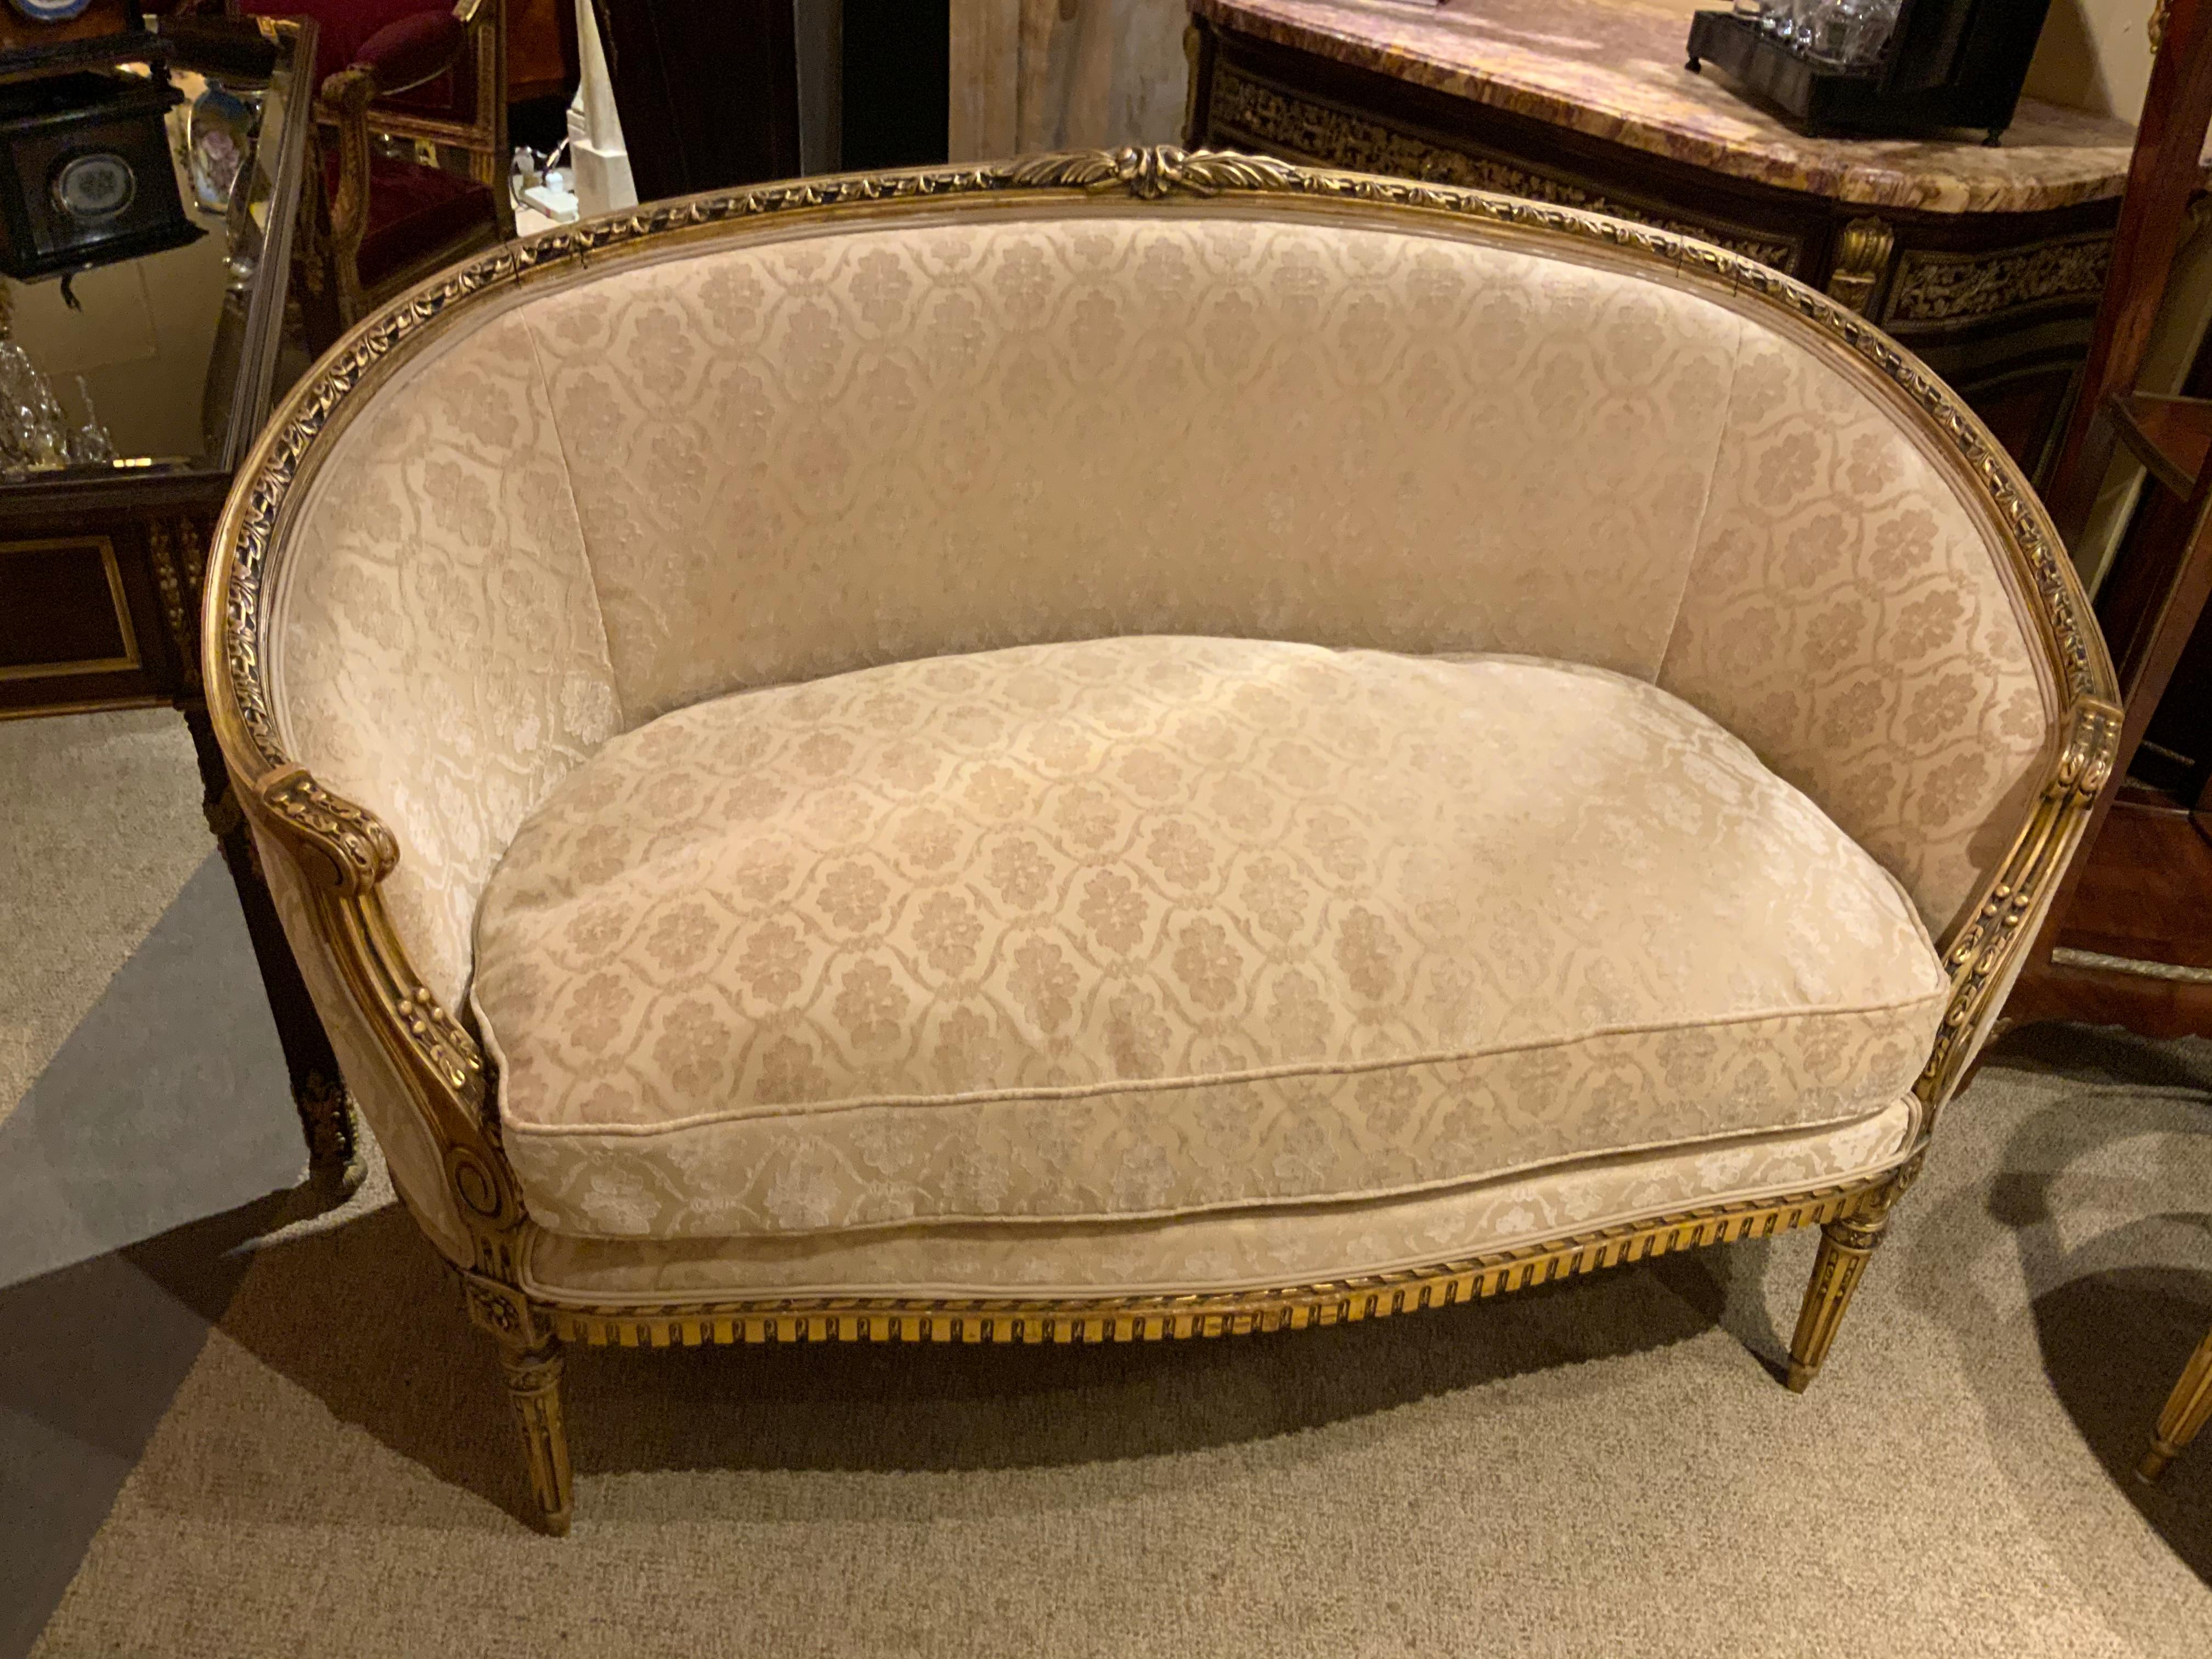 Curved loveseat /canapé with two matching arm chairs in giltwood. New cream colored upholstery,
The back of the settee is beautifully curved and the seat has a down and poly blend for a very
Comfortable seat. All three pieces are sturdy and